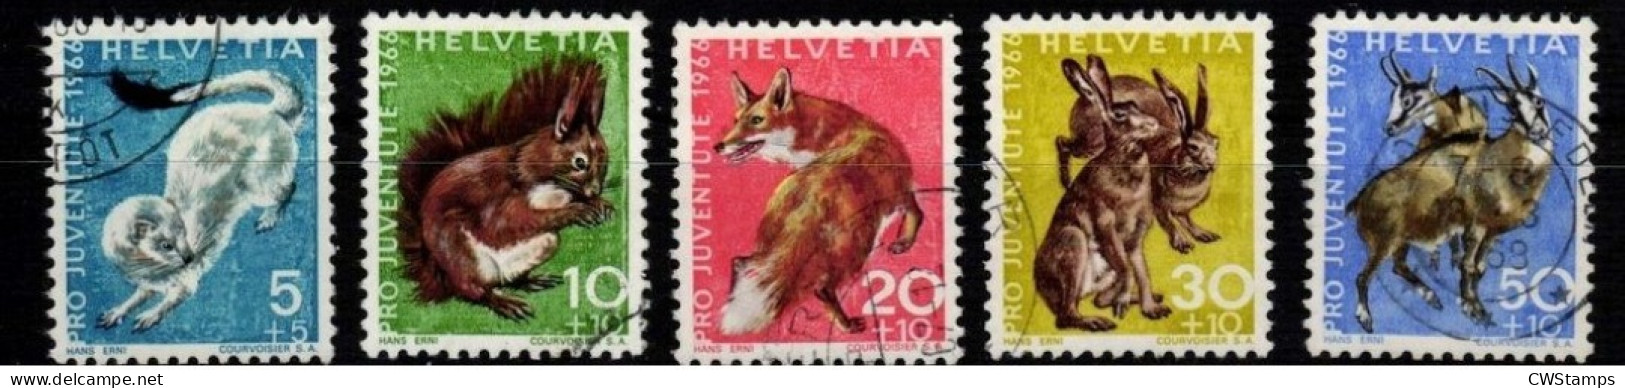 ..Zwitserland 1966 Mi 845/49 - Used Stamps